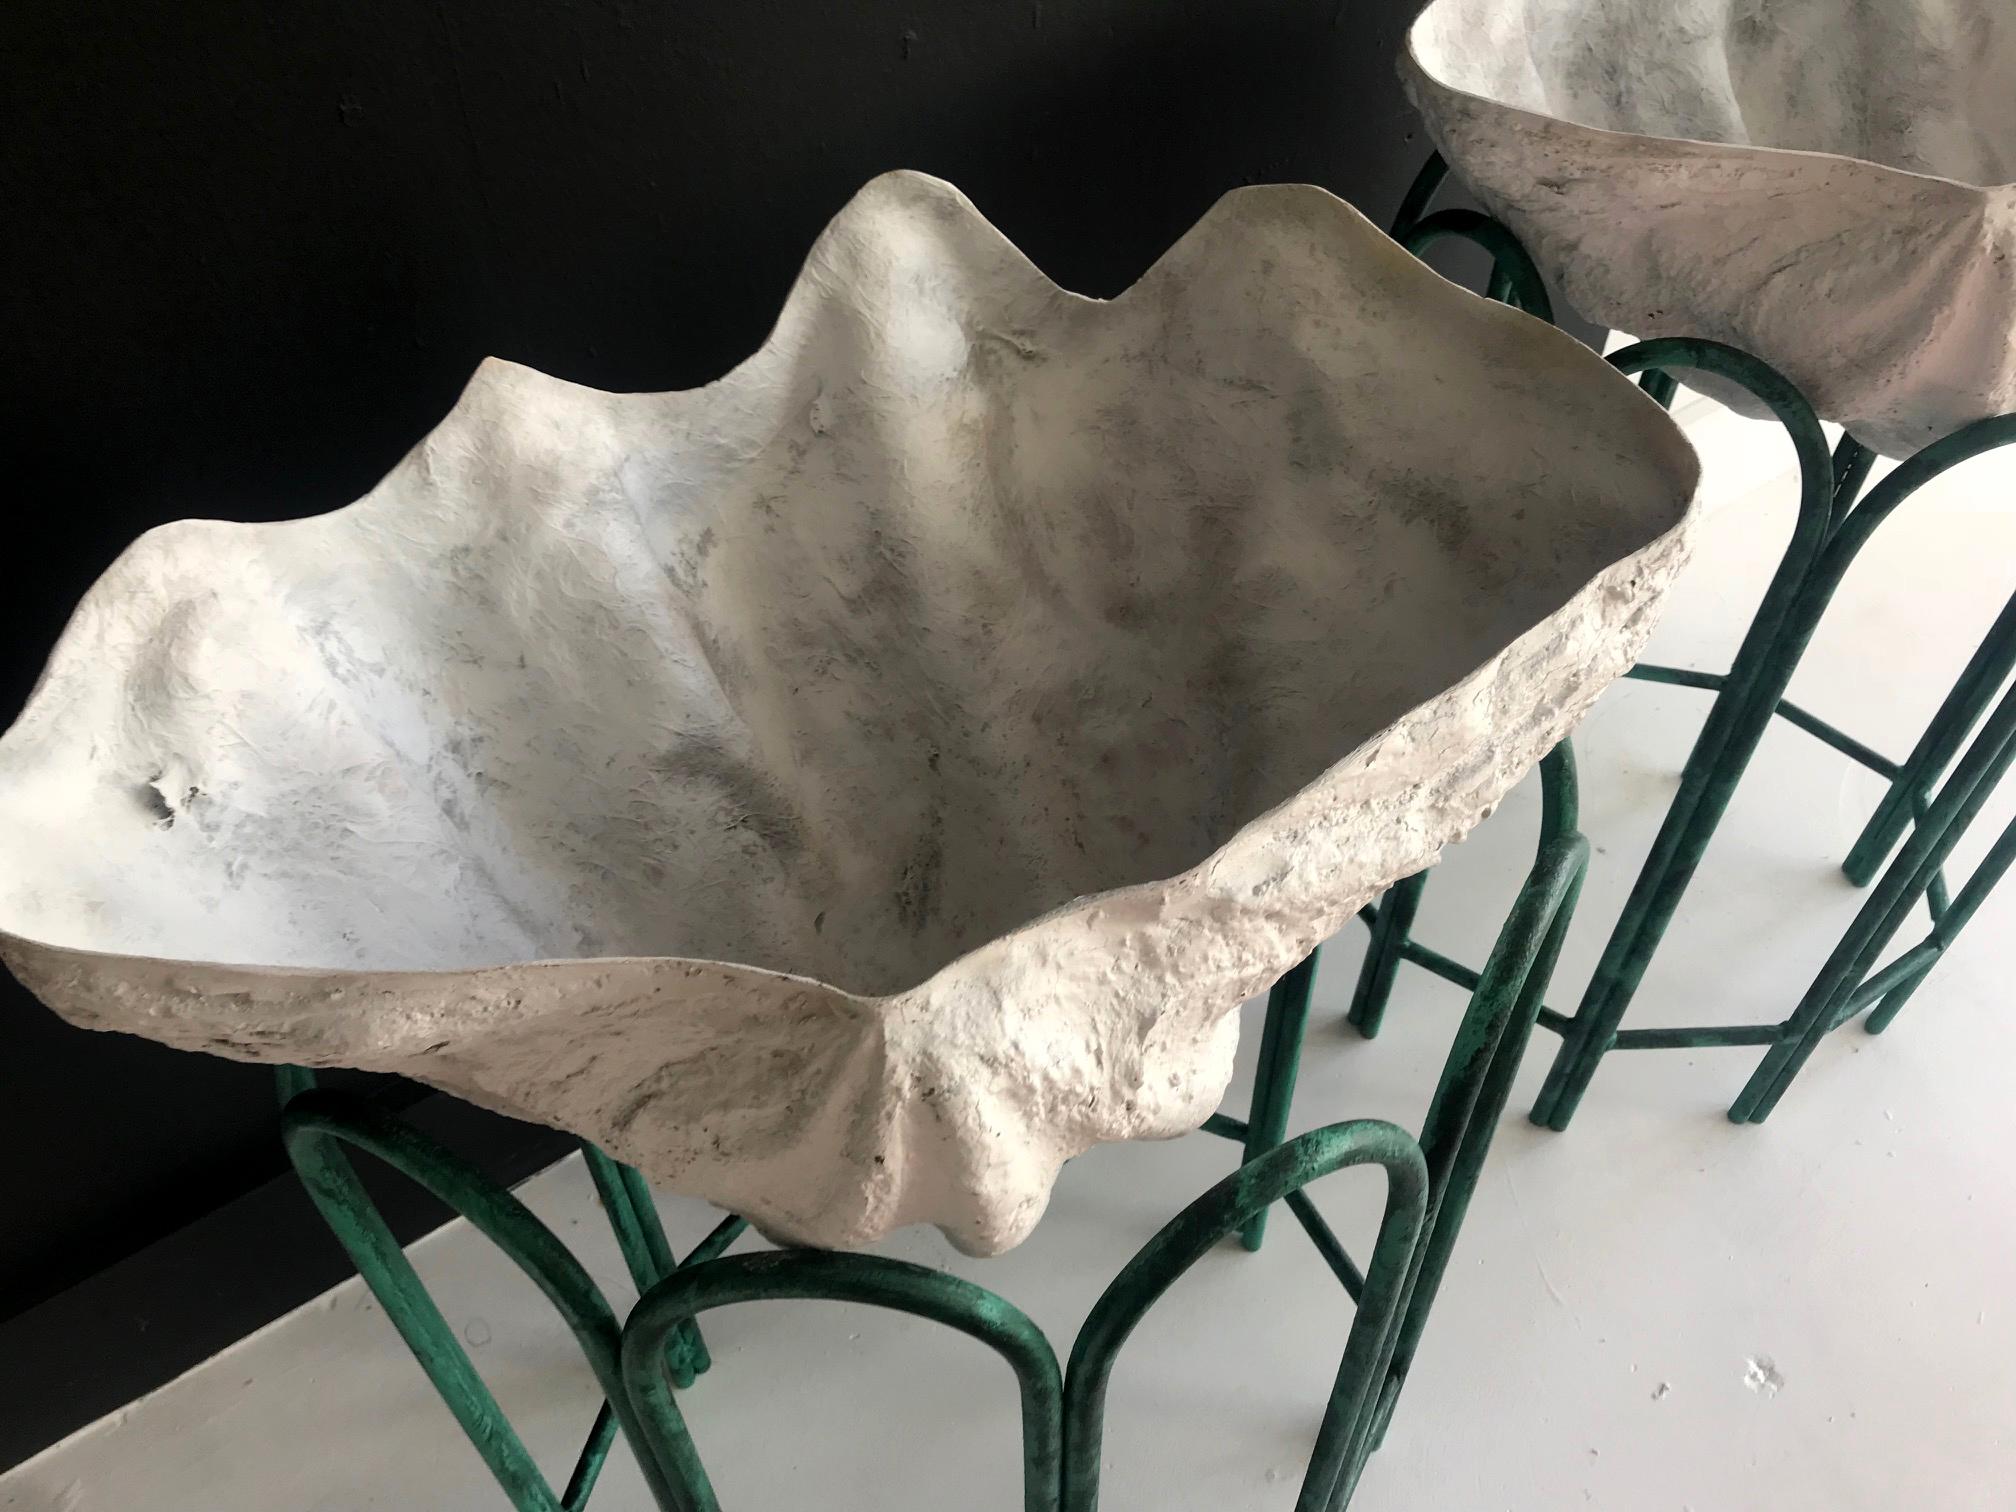 A Pair of Giant Clam Shell Jardinières or Tables by Tony Duquette 2